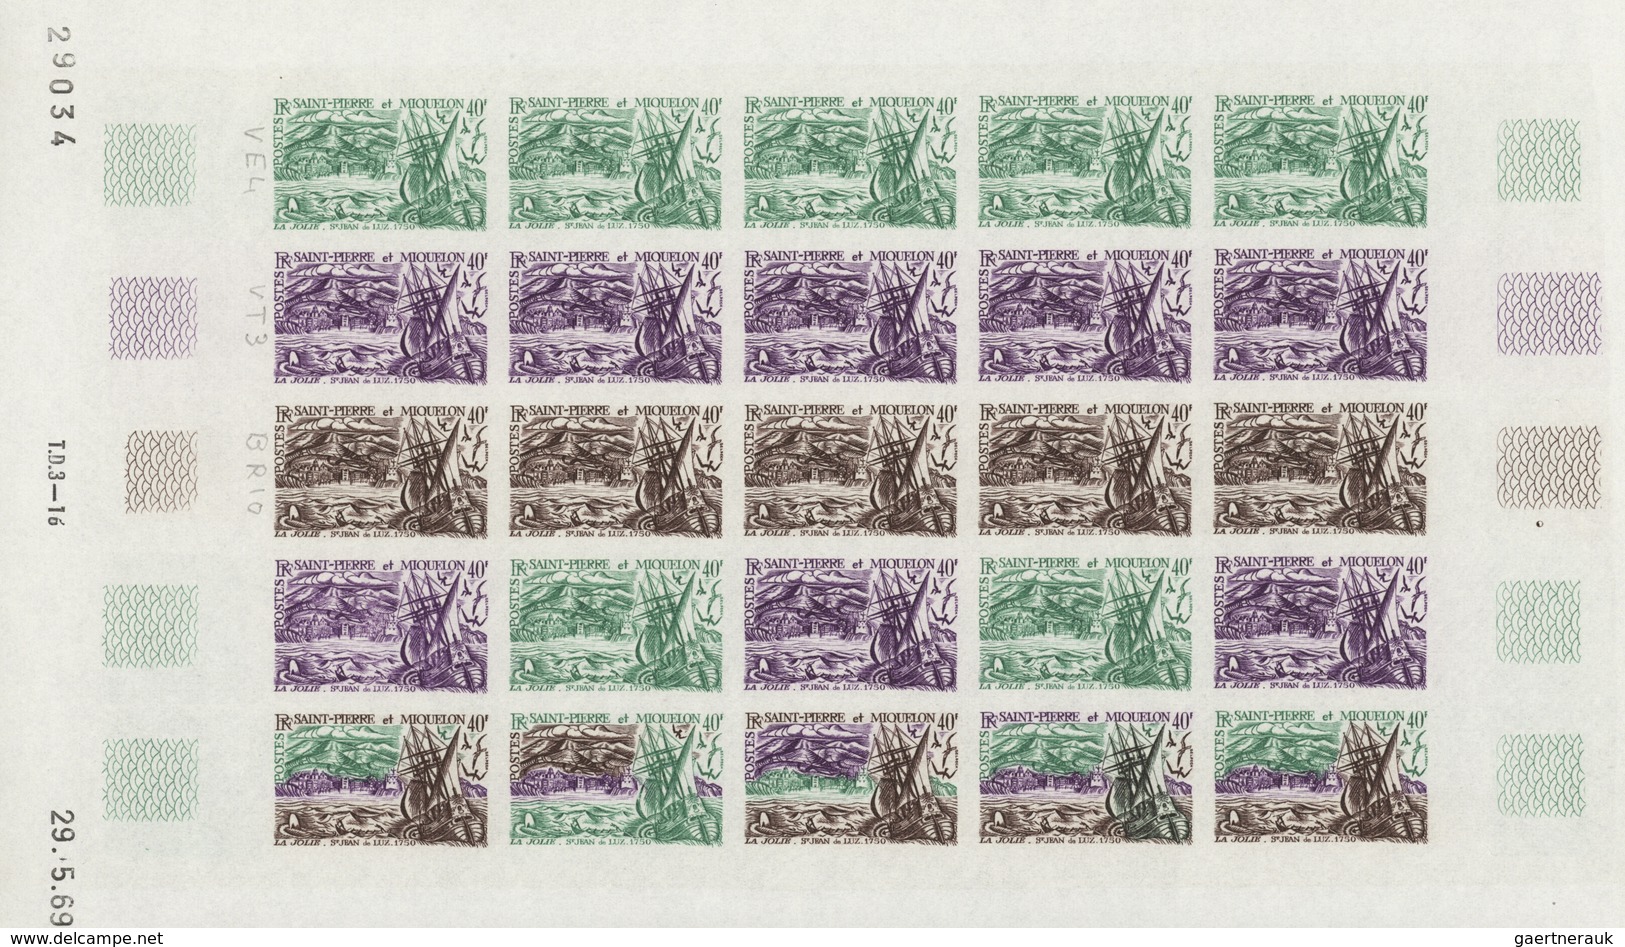 St. Pierre und Miquelon: 1969/1975, IMPERFORATE COLOUR PROOFS, MNH collection of 49 complete sheets